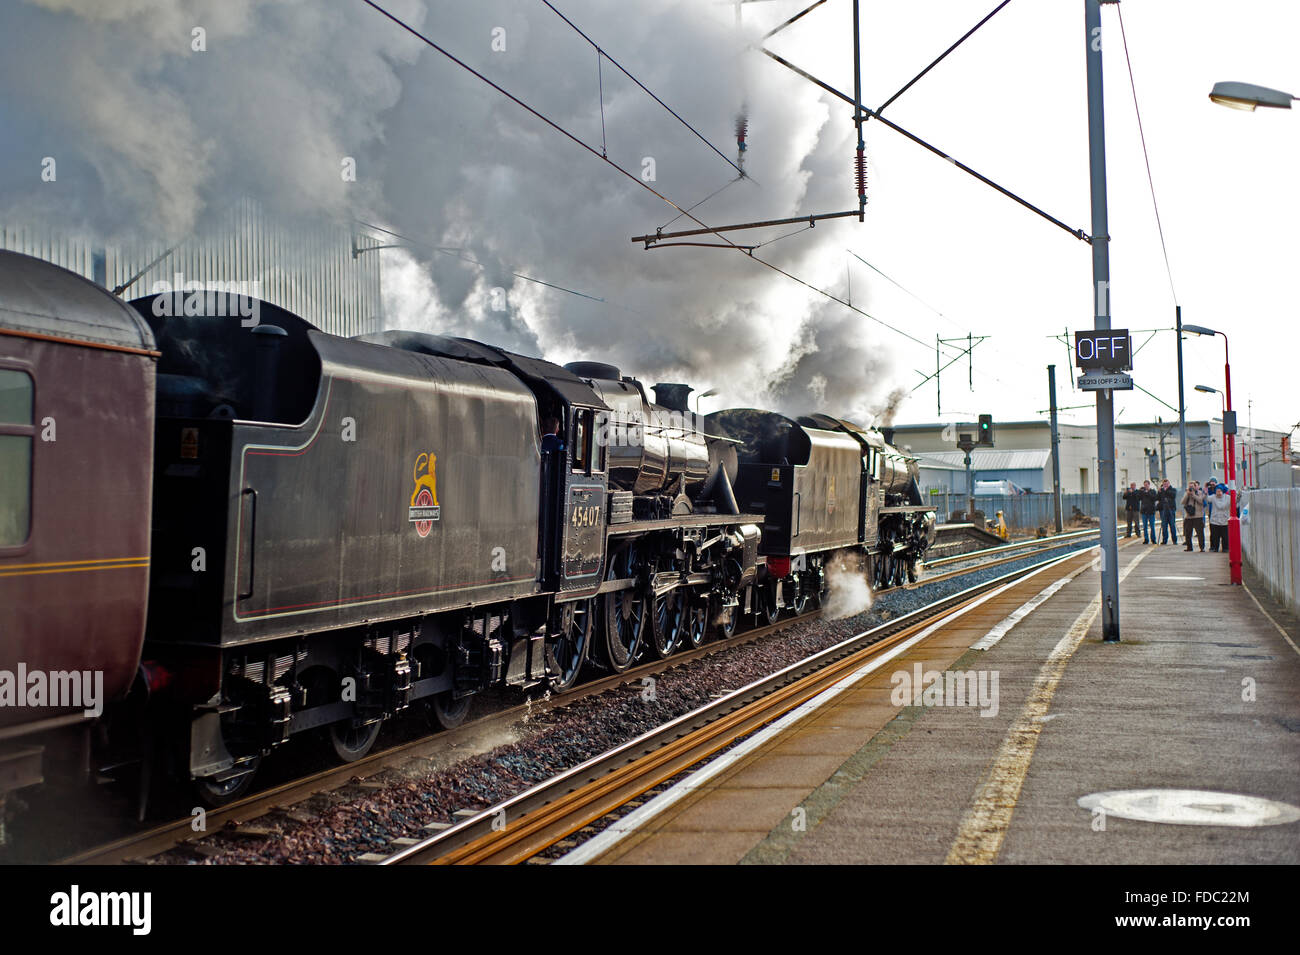 Black 5s Nos 45407 and 44871 storm through Penrith Station Stock Photo